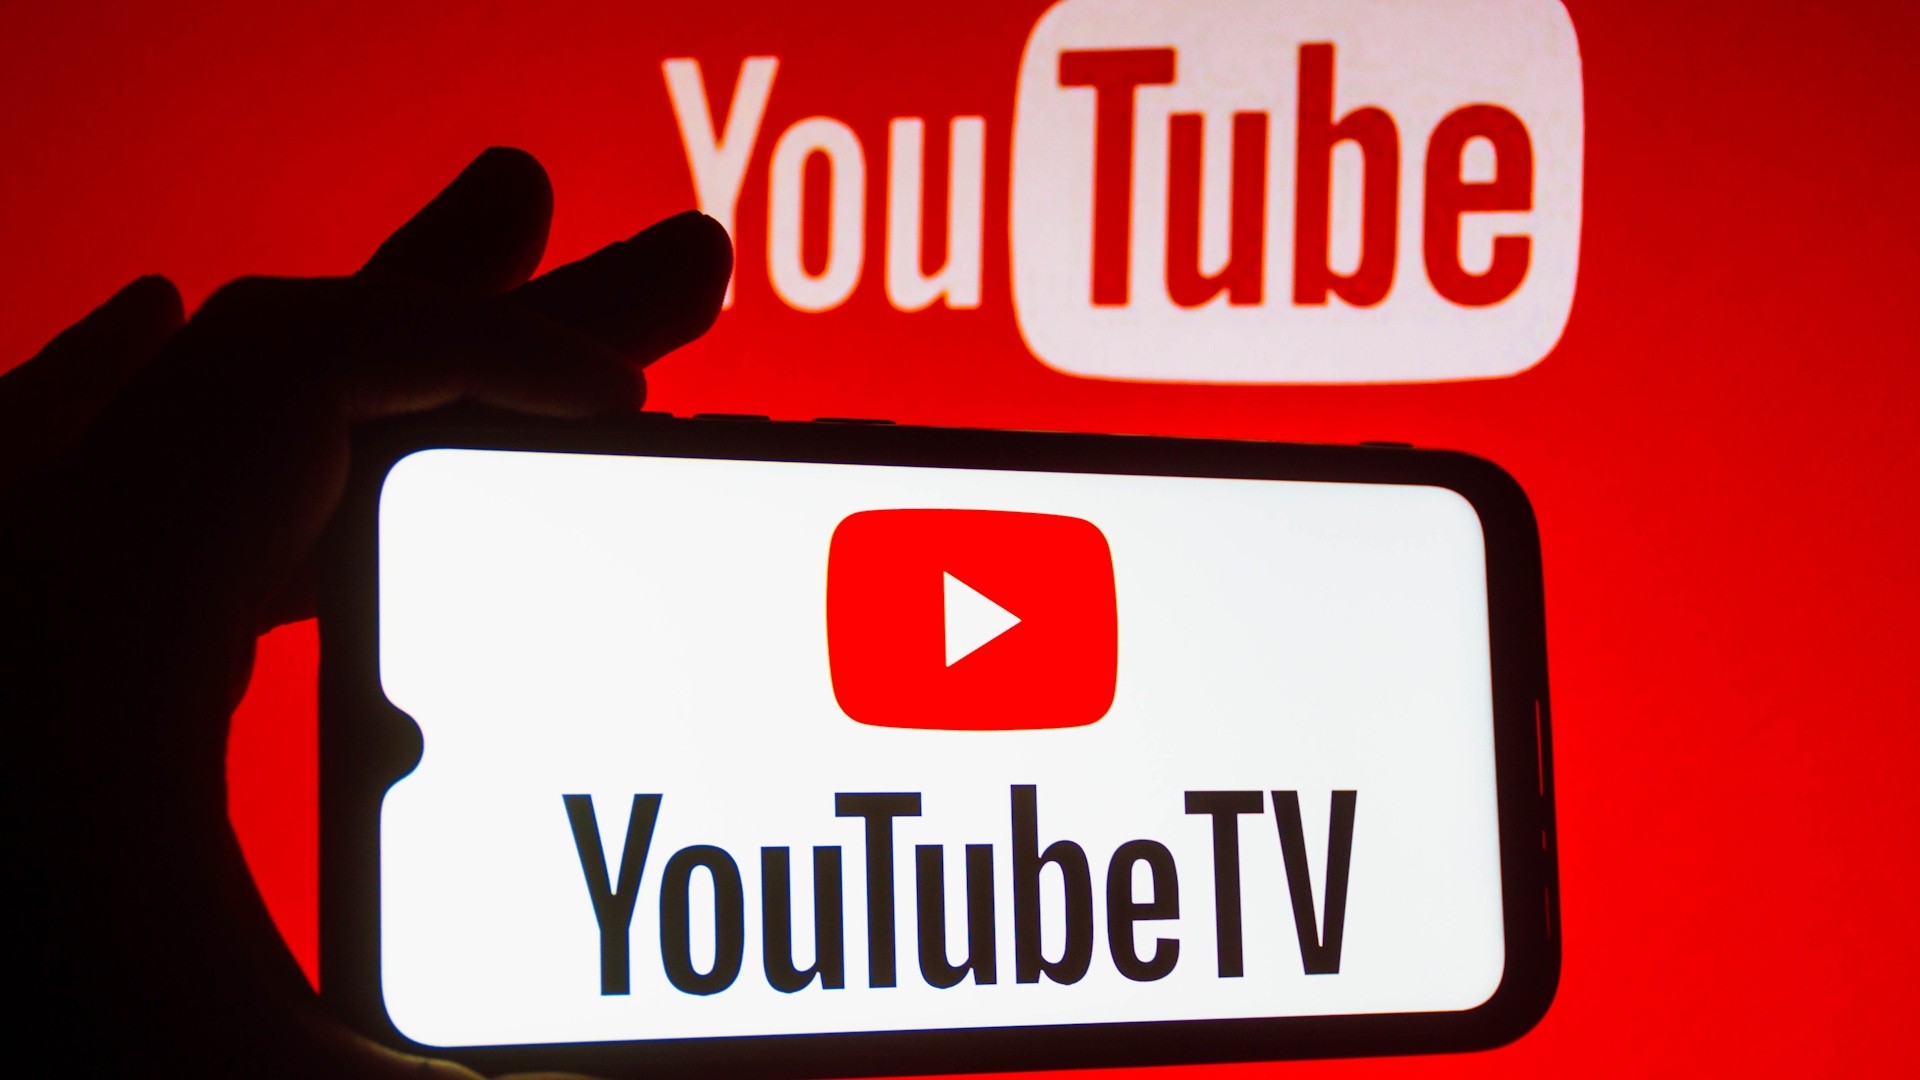 YouTube TVs first season as the carrier of NFL Sunday Ticket begins Sunday